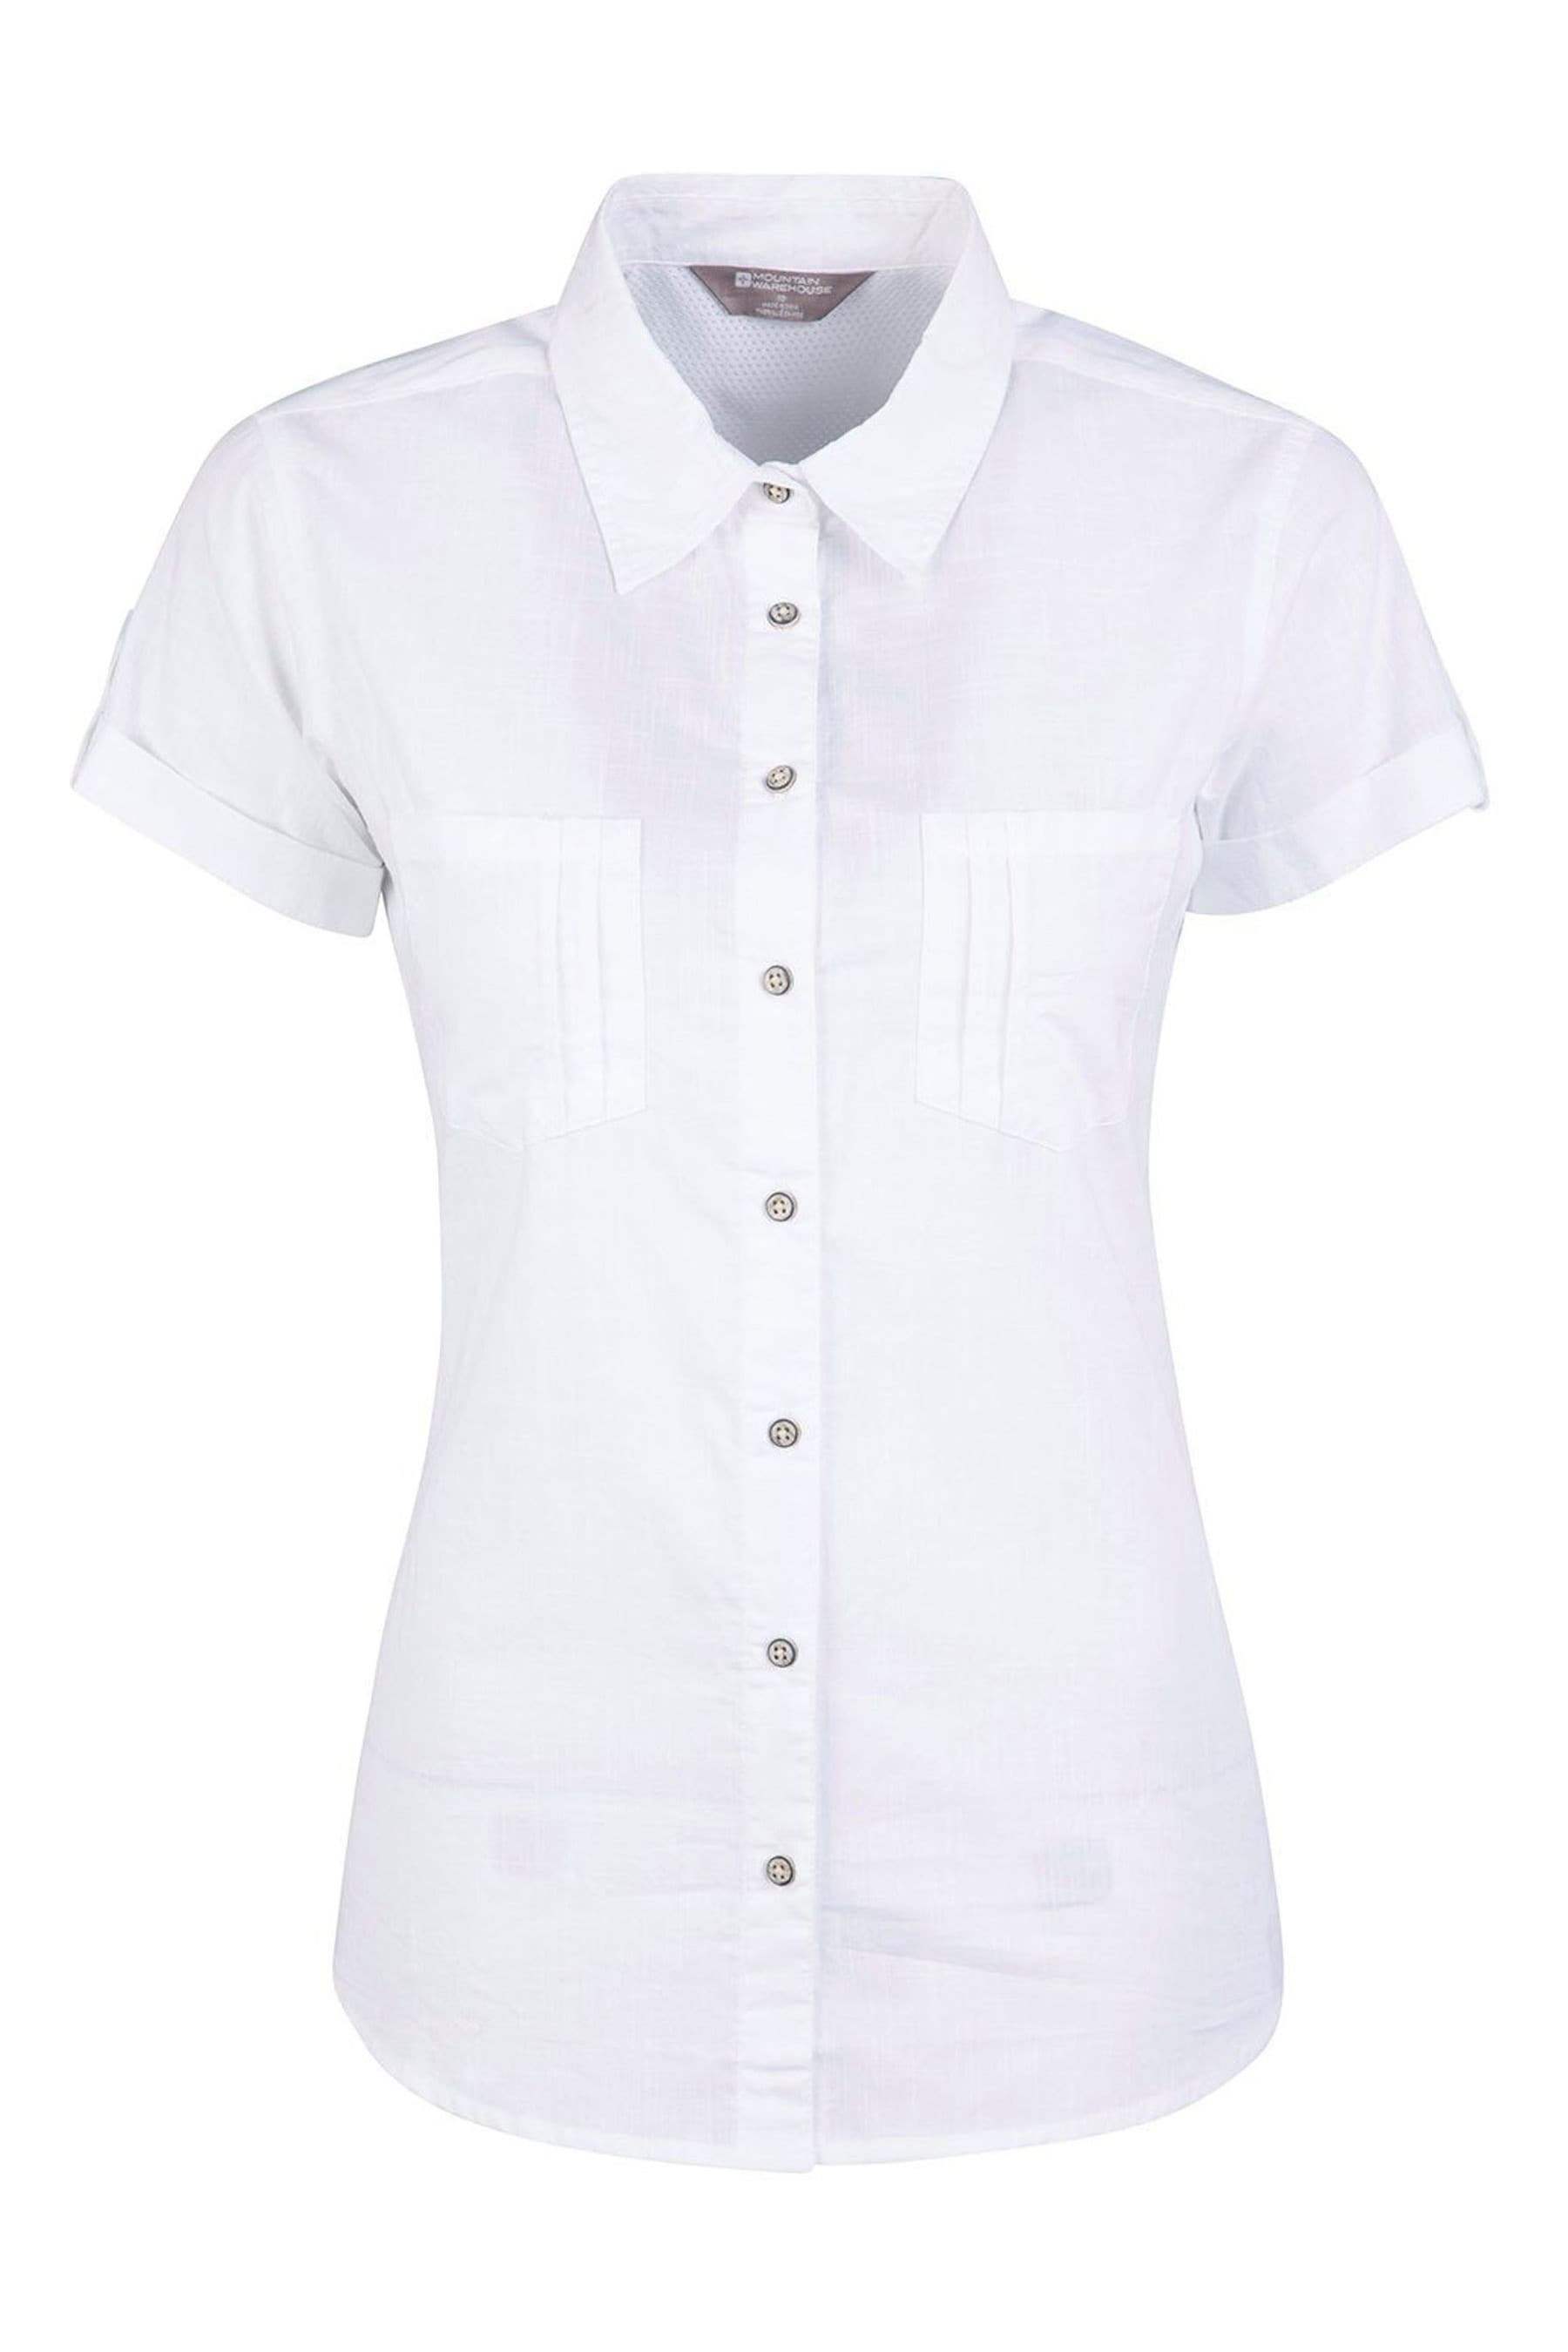 Buy Mountain Warehouse White Coconut Short Sleeve Womens Shirt from the ...